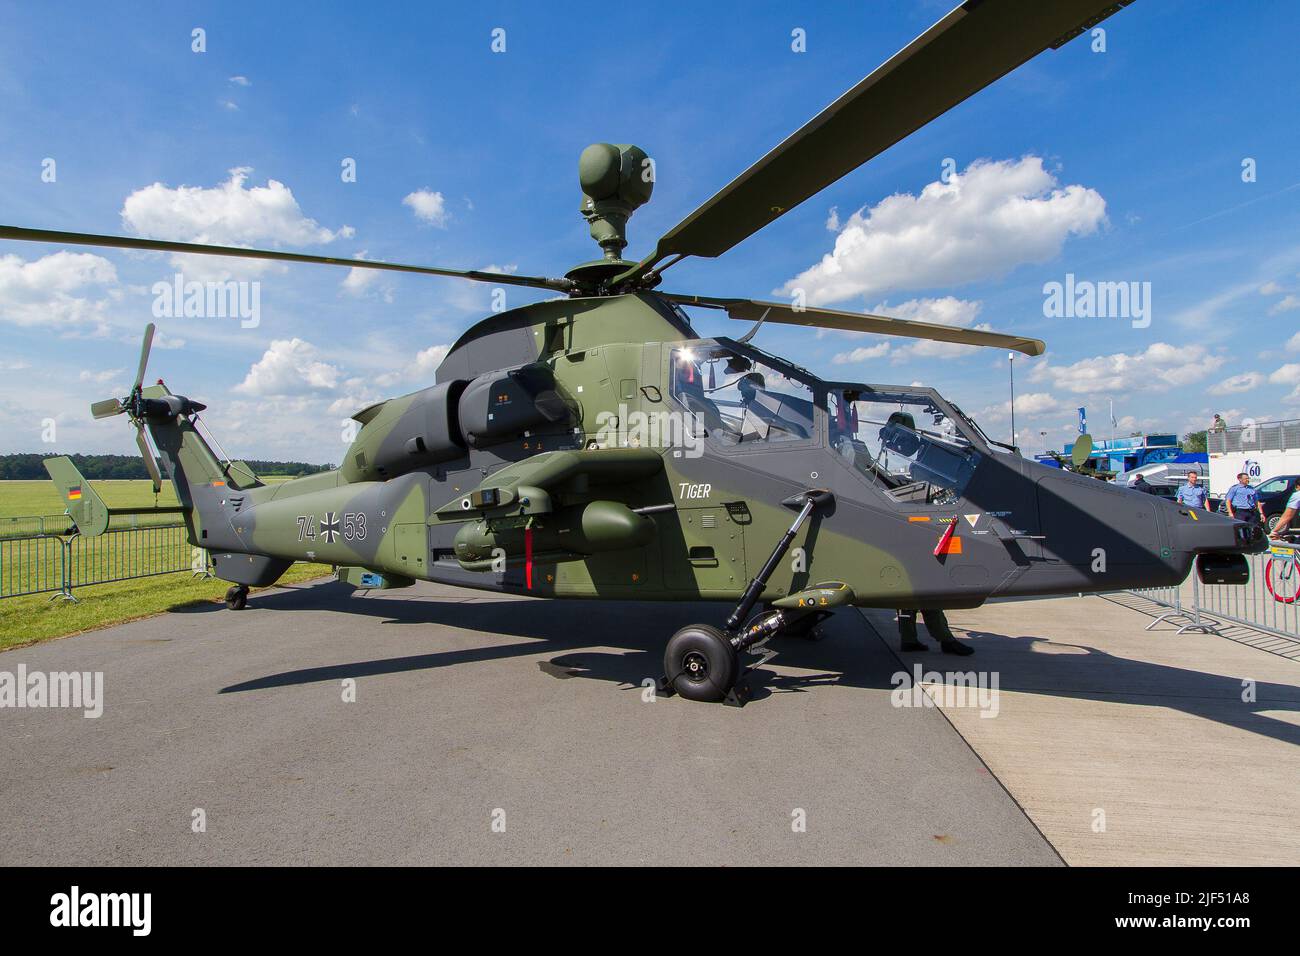 An Eurocopter Tiger combat helicopter at the apron at an exhibition Stock Photo